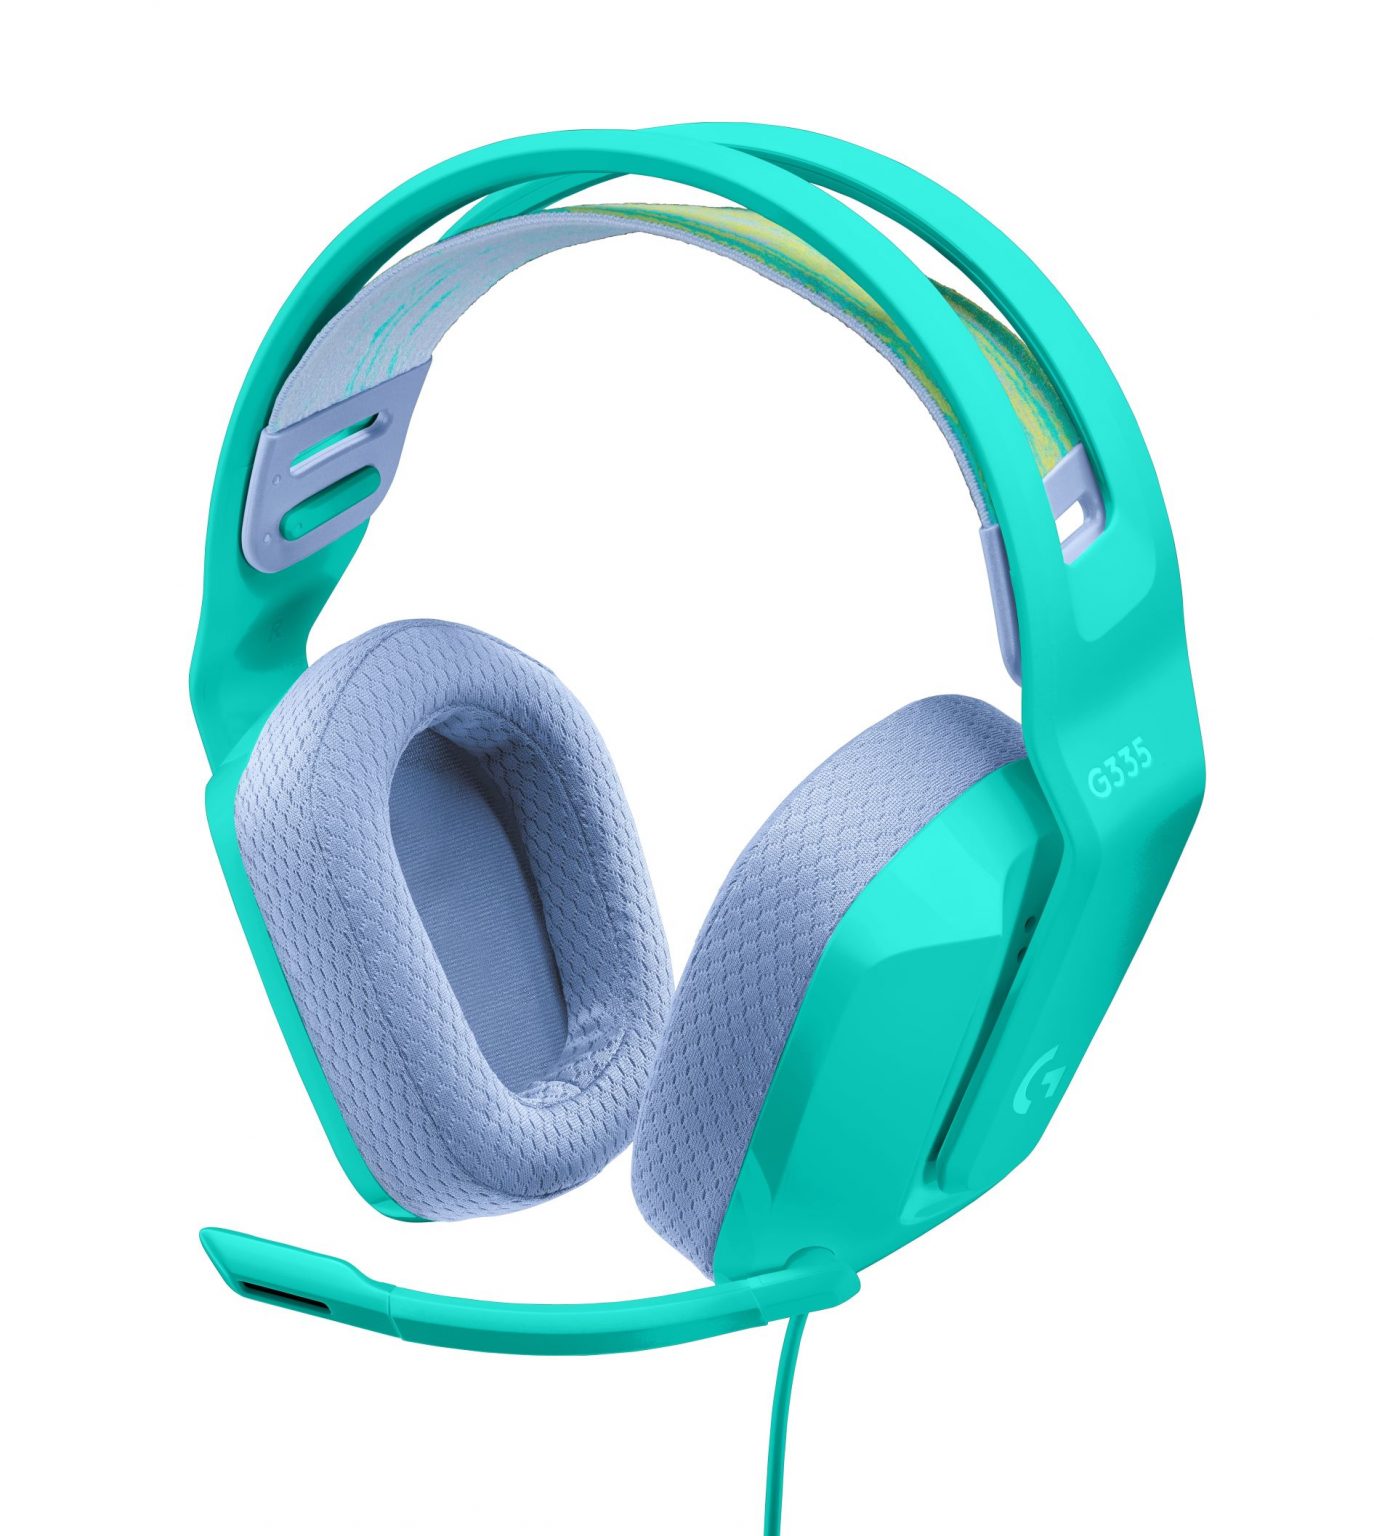 The new Logitech G 335 Wired Gaming Headset comes in mint (pictured), black or white.